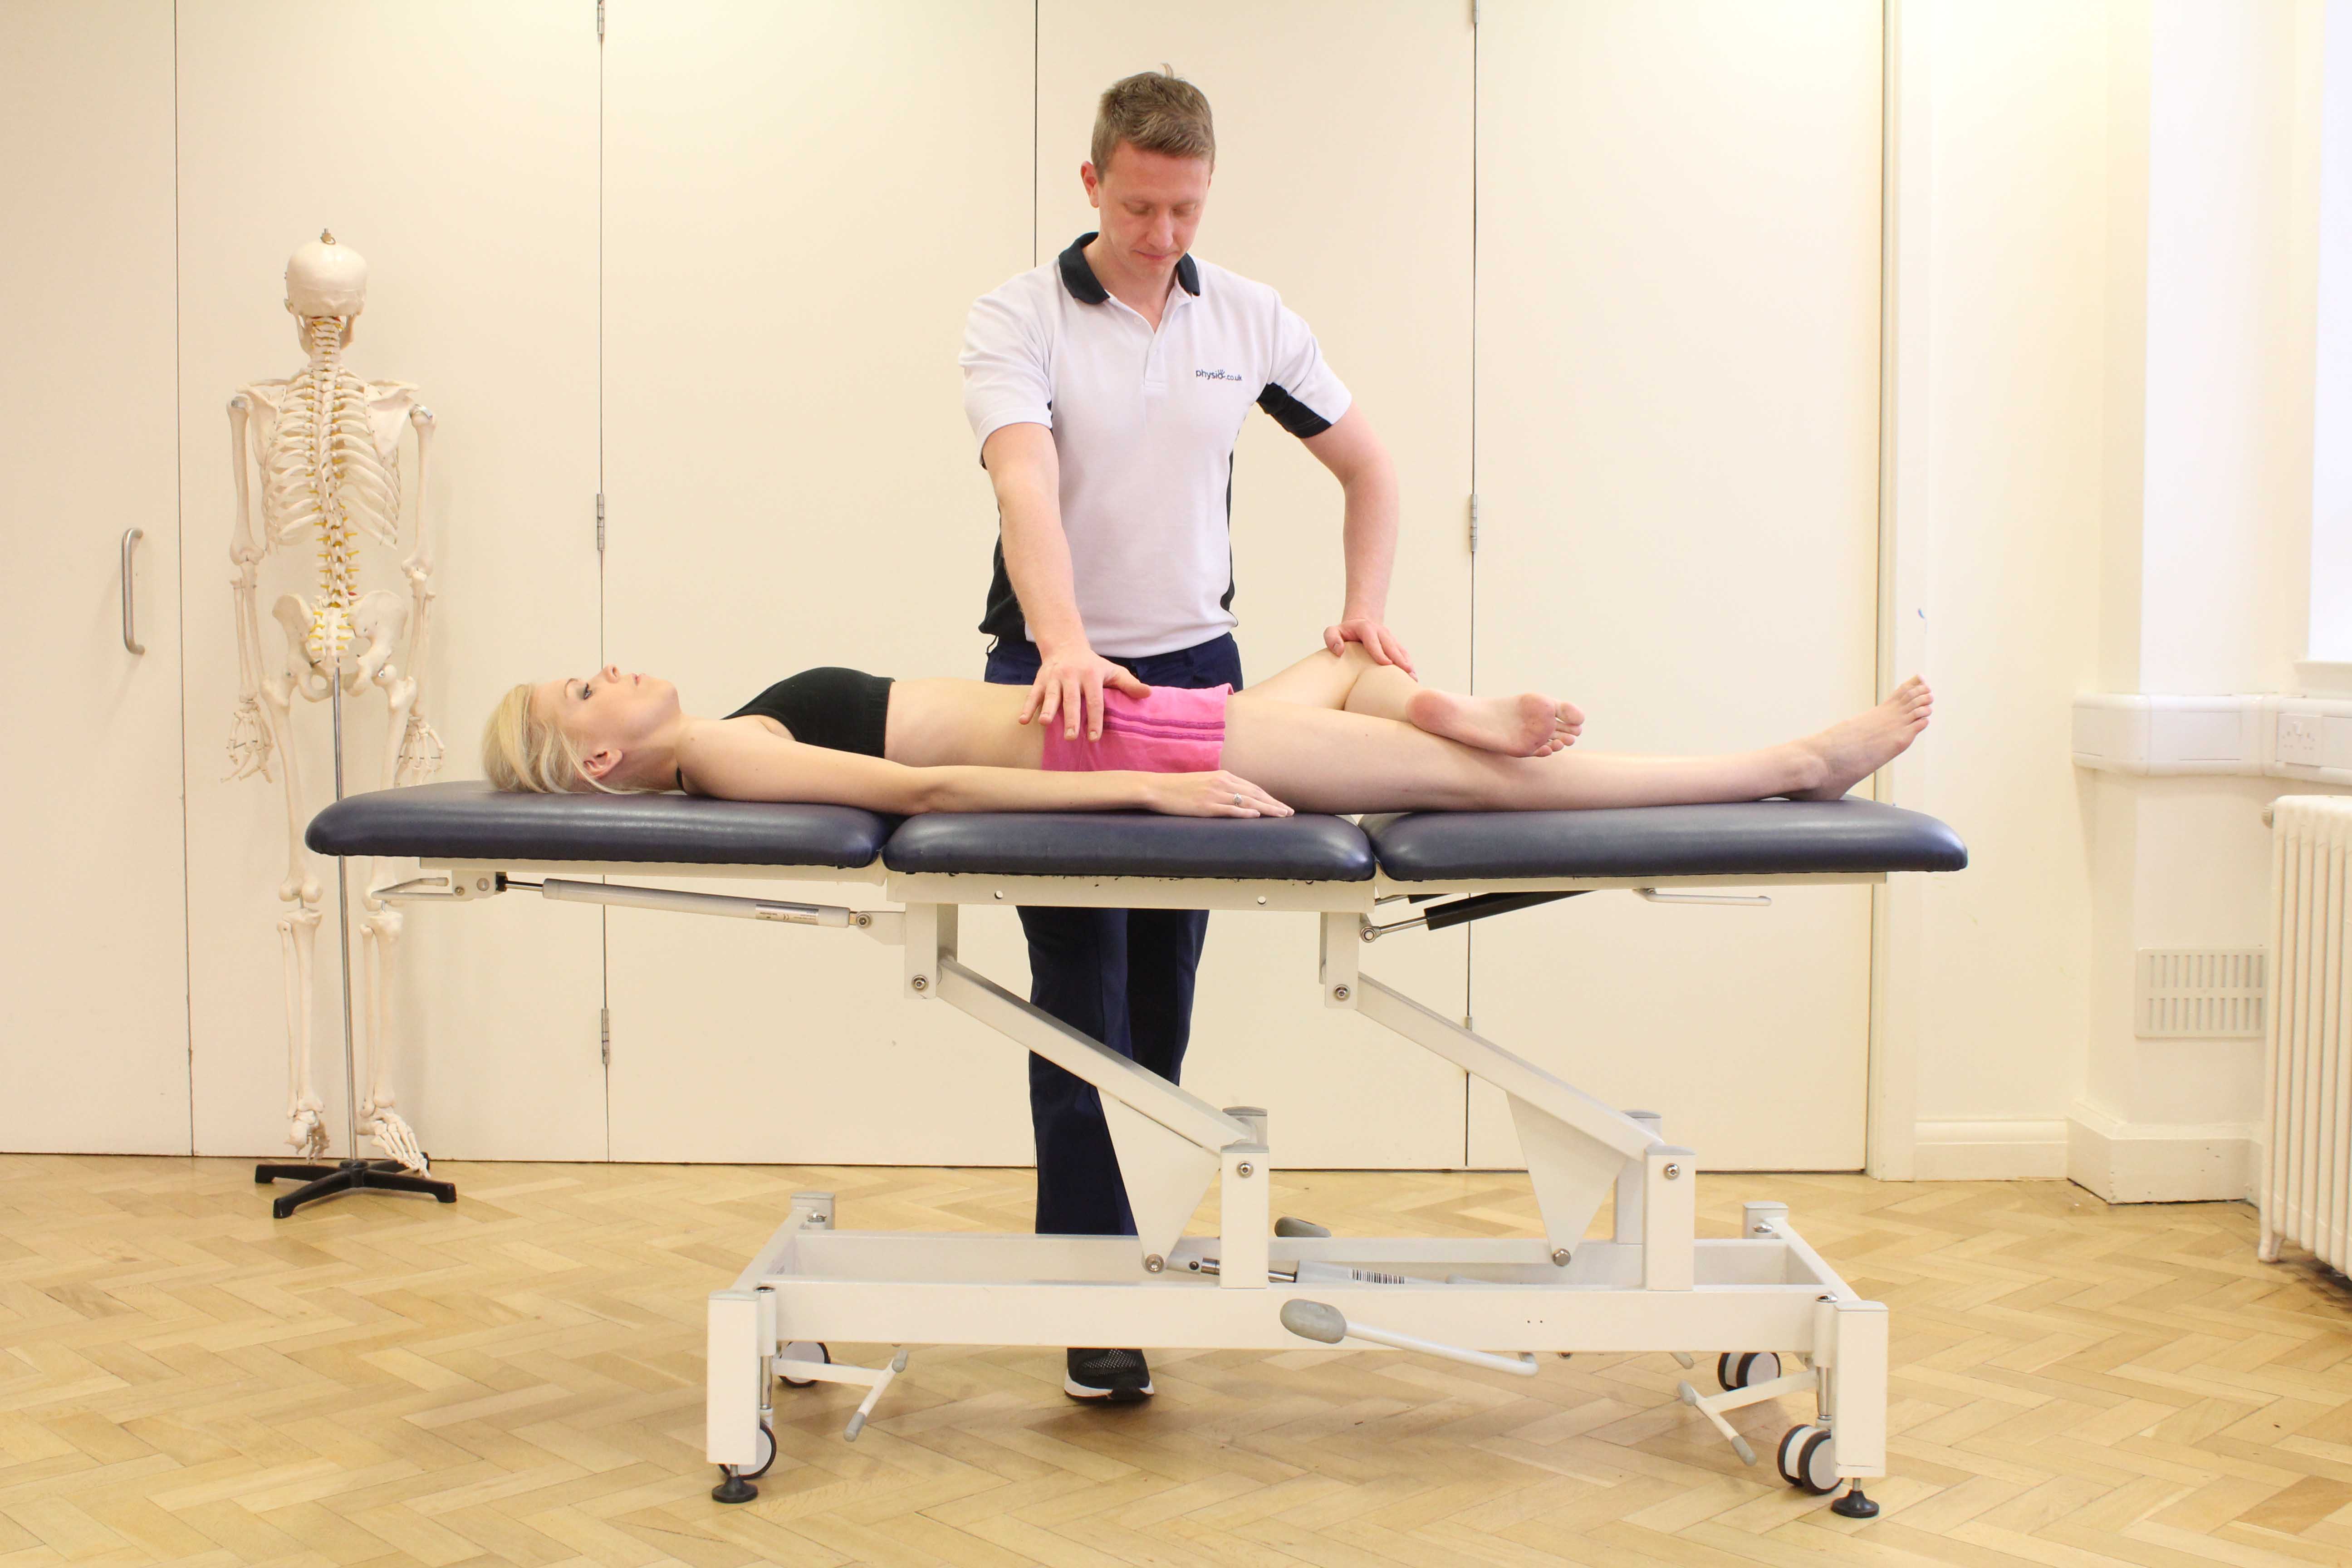 Passive mobilisations and stretches of the hips and pelvis by an experienced physiotherapist